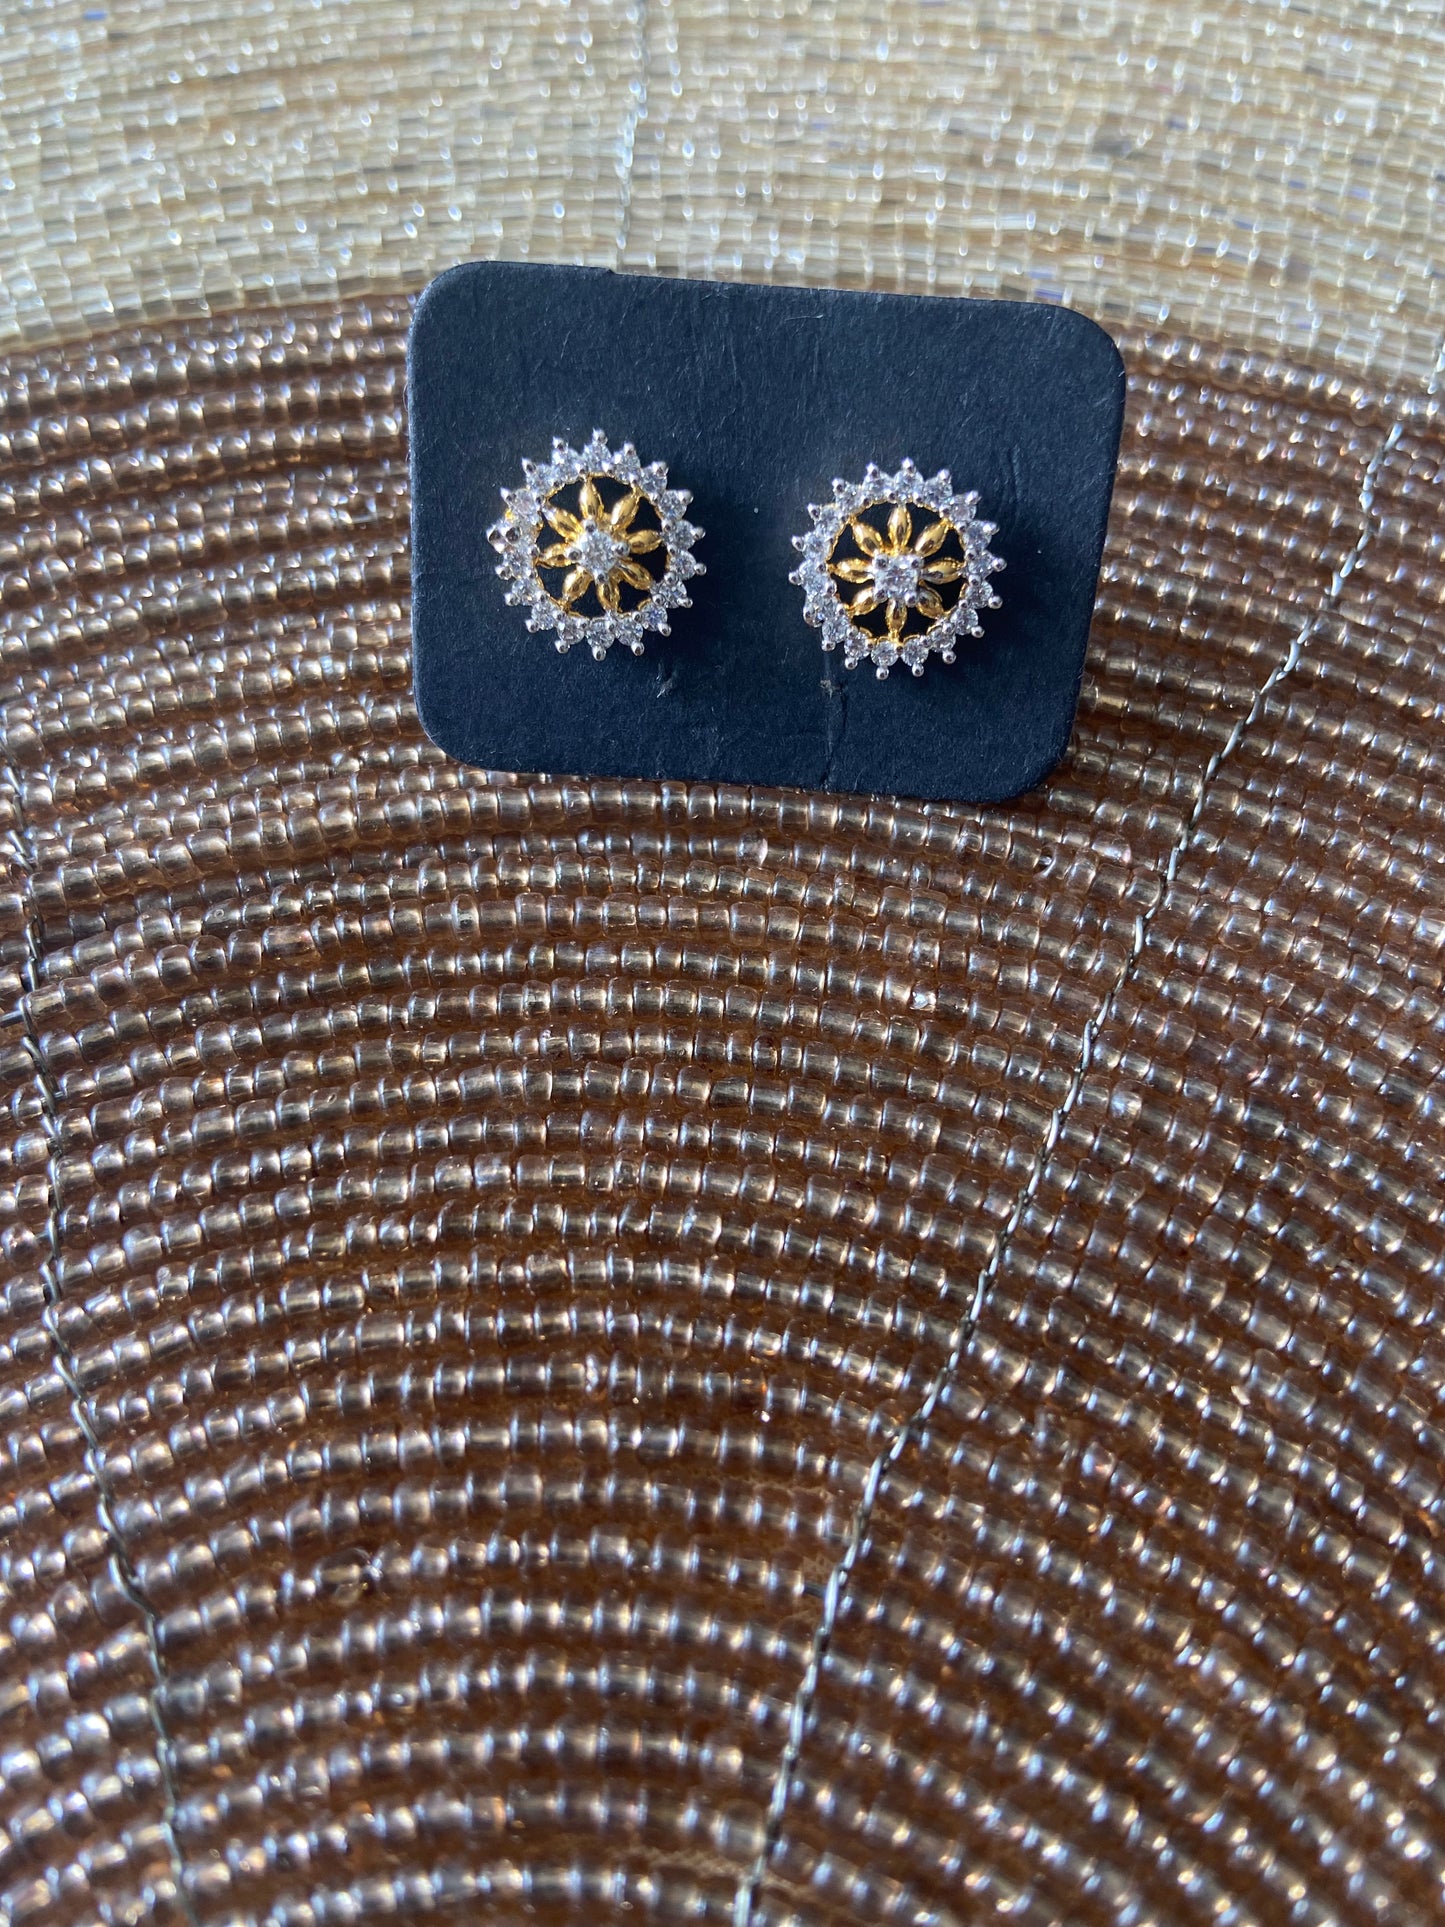 Wheel stud earring with faux stones